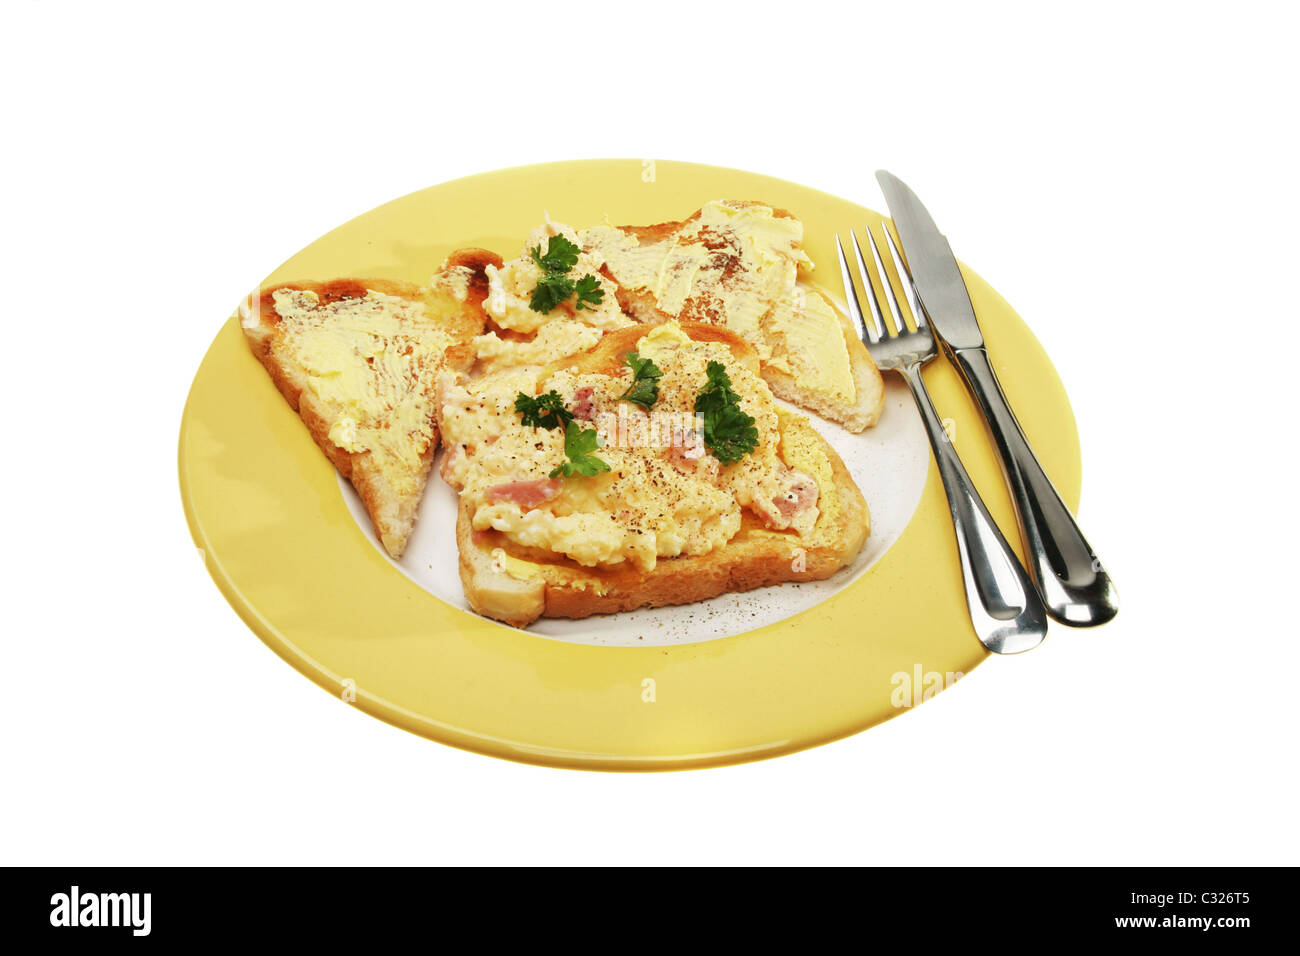 Scrambled eggs on toast on a plate with knife and fork Stock Photo